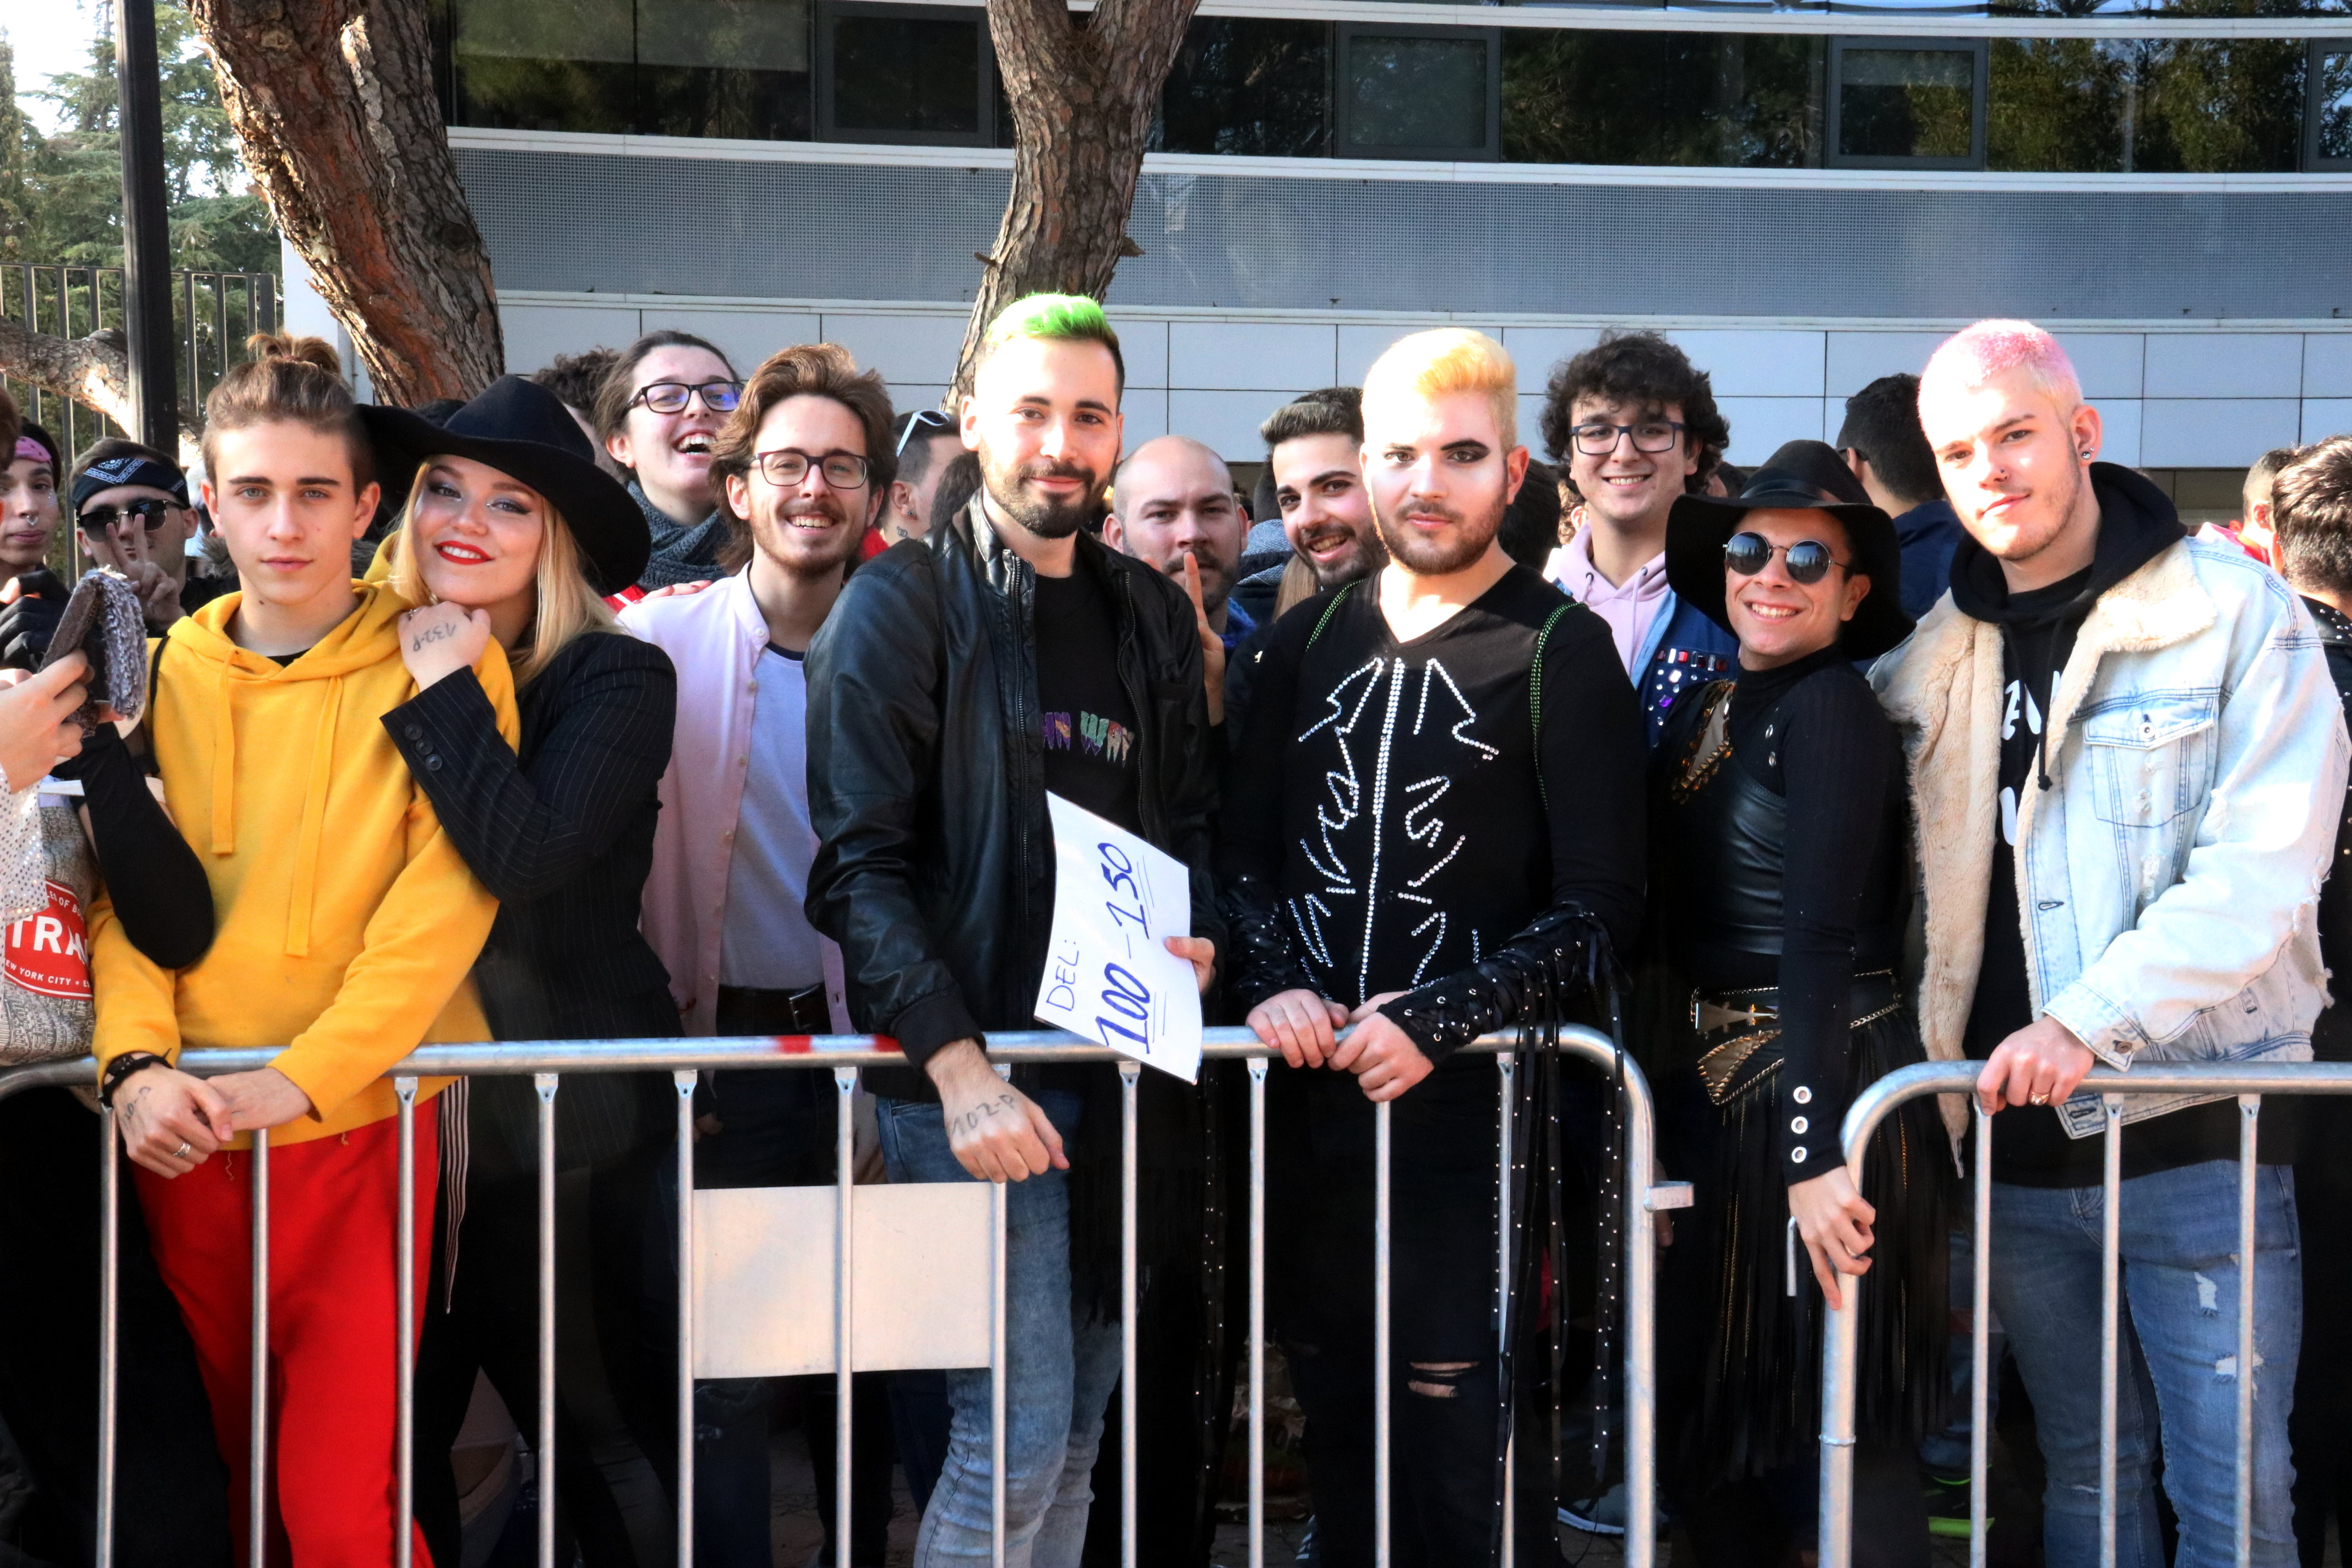 Various fans outside of the Palau Sant Jordi concert hall in Barcelona on January 14 before the Lady Gaga show (by Jordi Bataller)